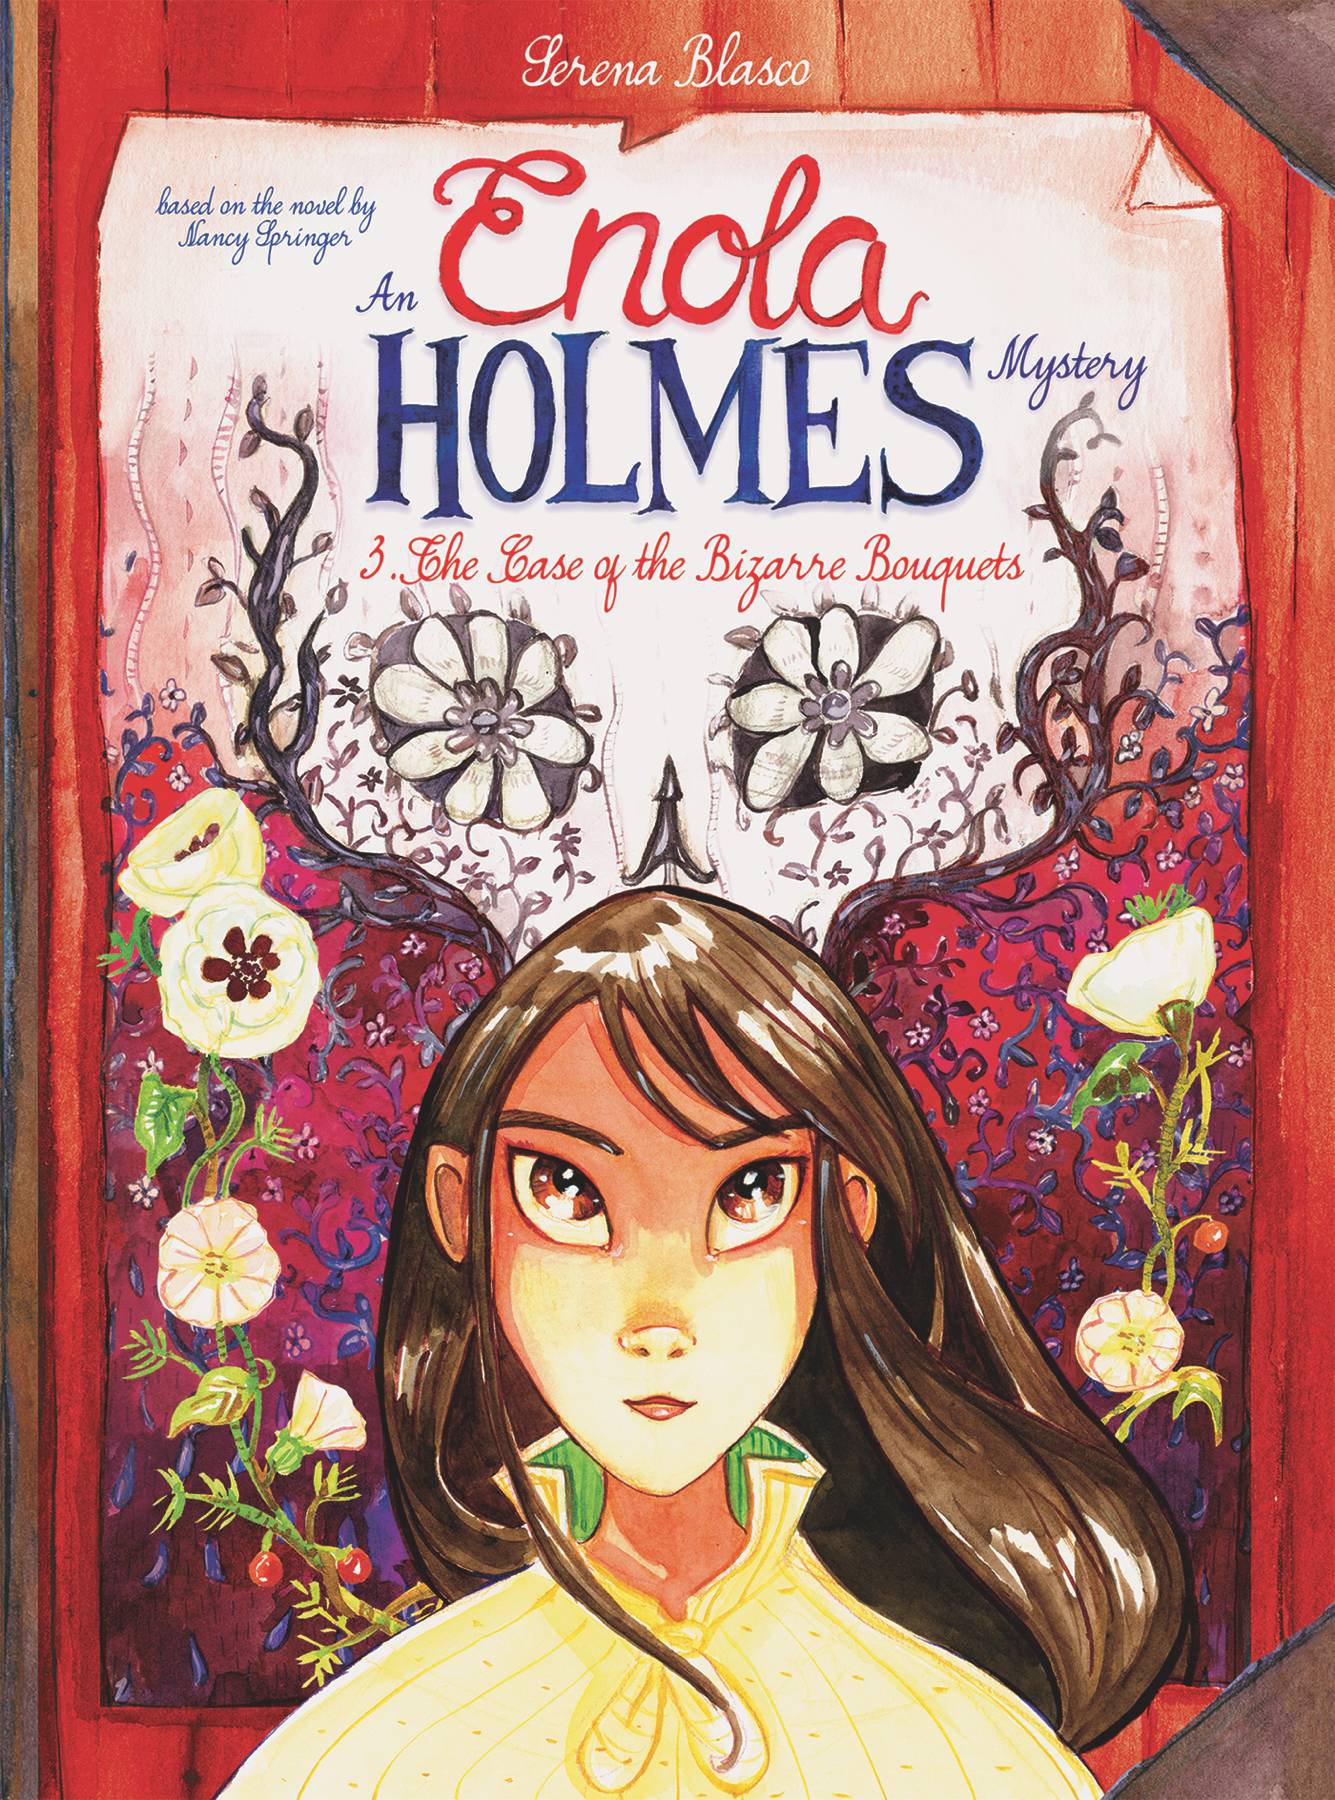 Enola Holmes Hardcover Volume 3 Case of the Bizarre Bouquets